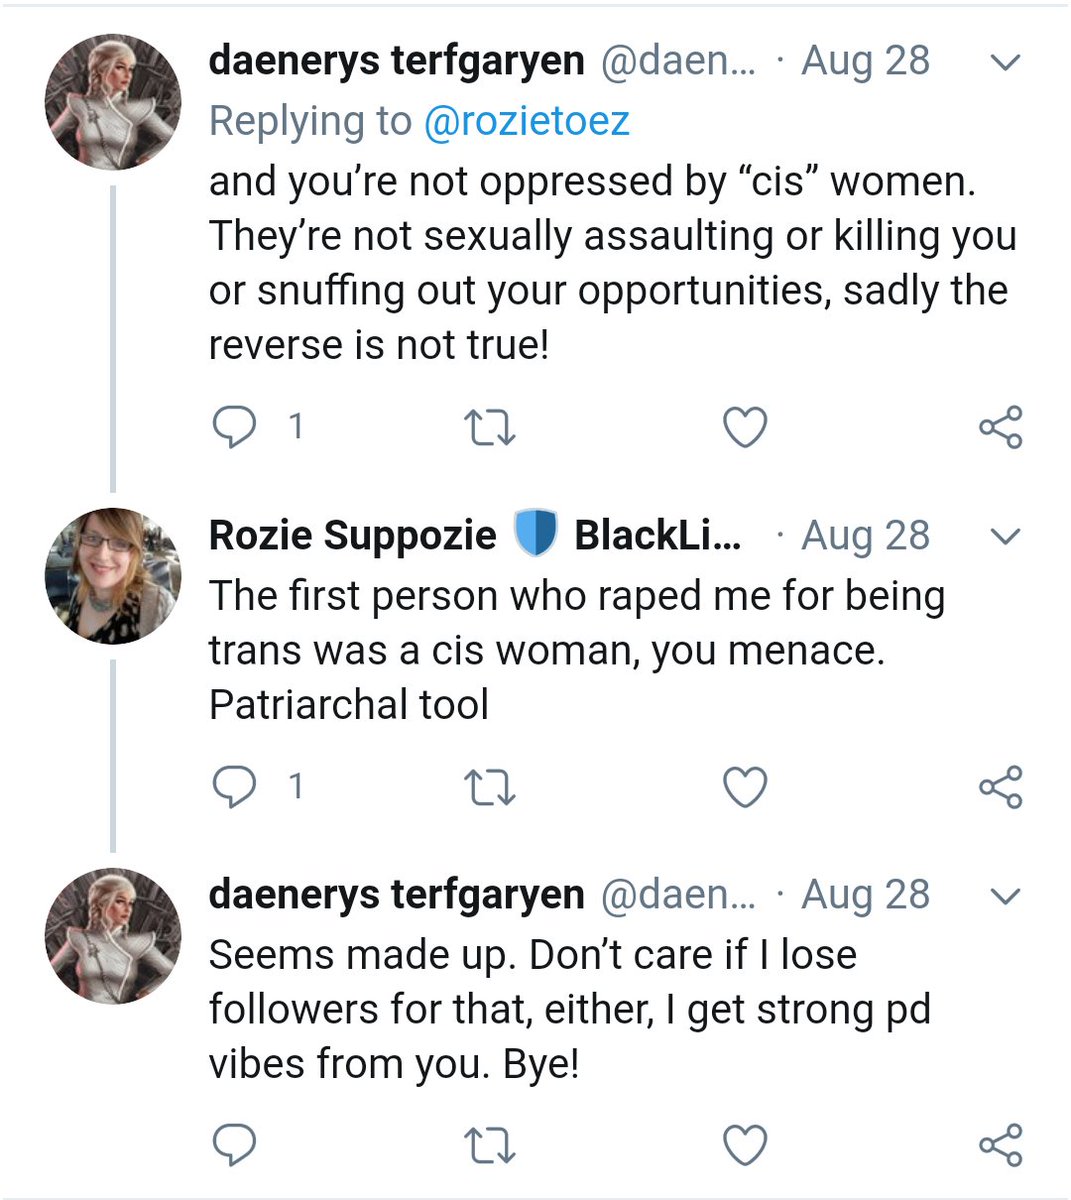 CW: CSA, rape GC insisted that cis women don't assault trans people. I pointed out that the first person who raped me was a cis woman.The GC accused me of lying and being a pedo. For being raped as a child, her pronouncement was that I'm the villain. https://twitter.com/daenerysXXborn/status/1299454395877388289?s=20